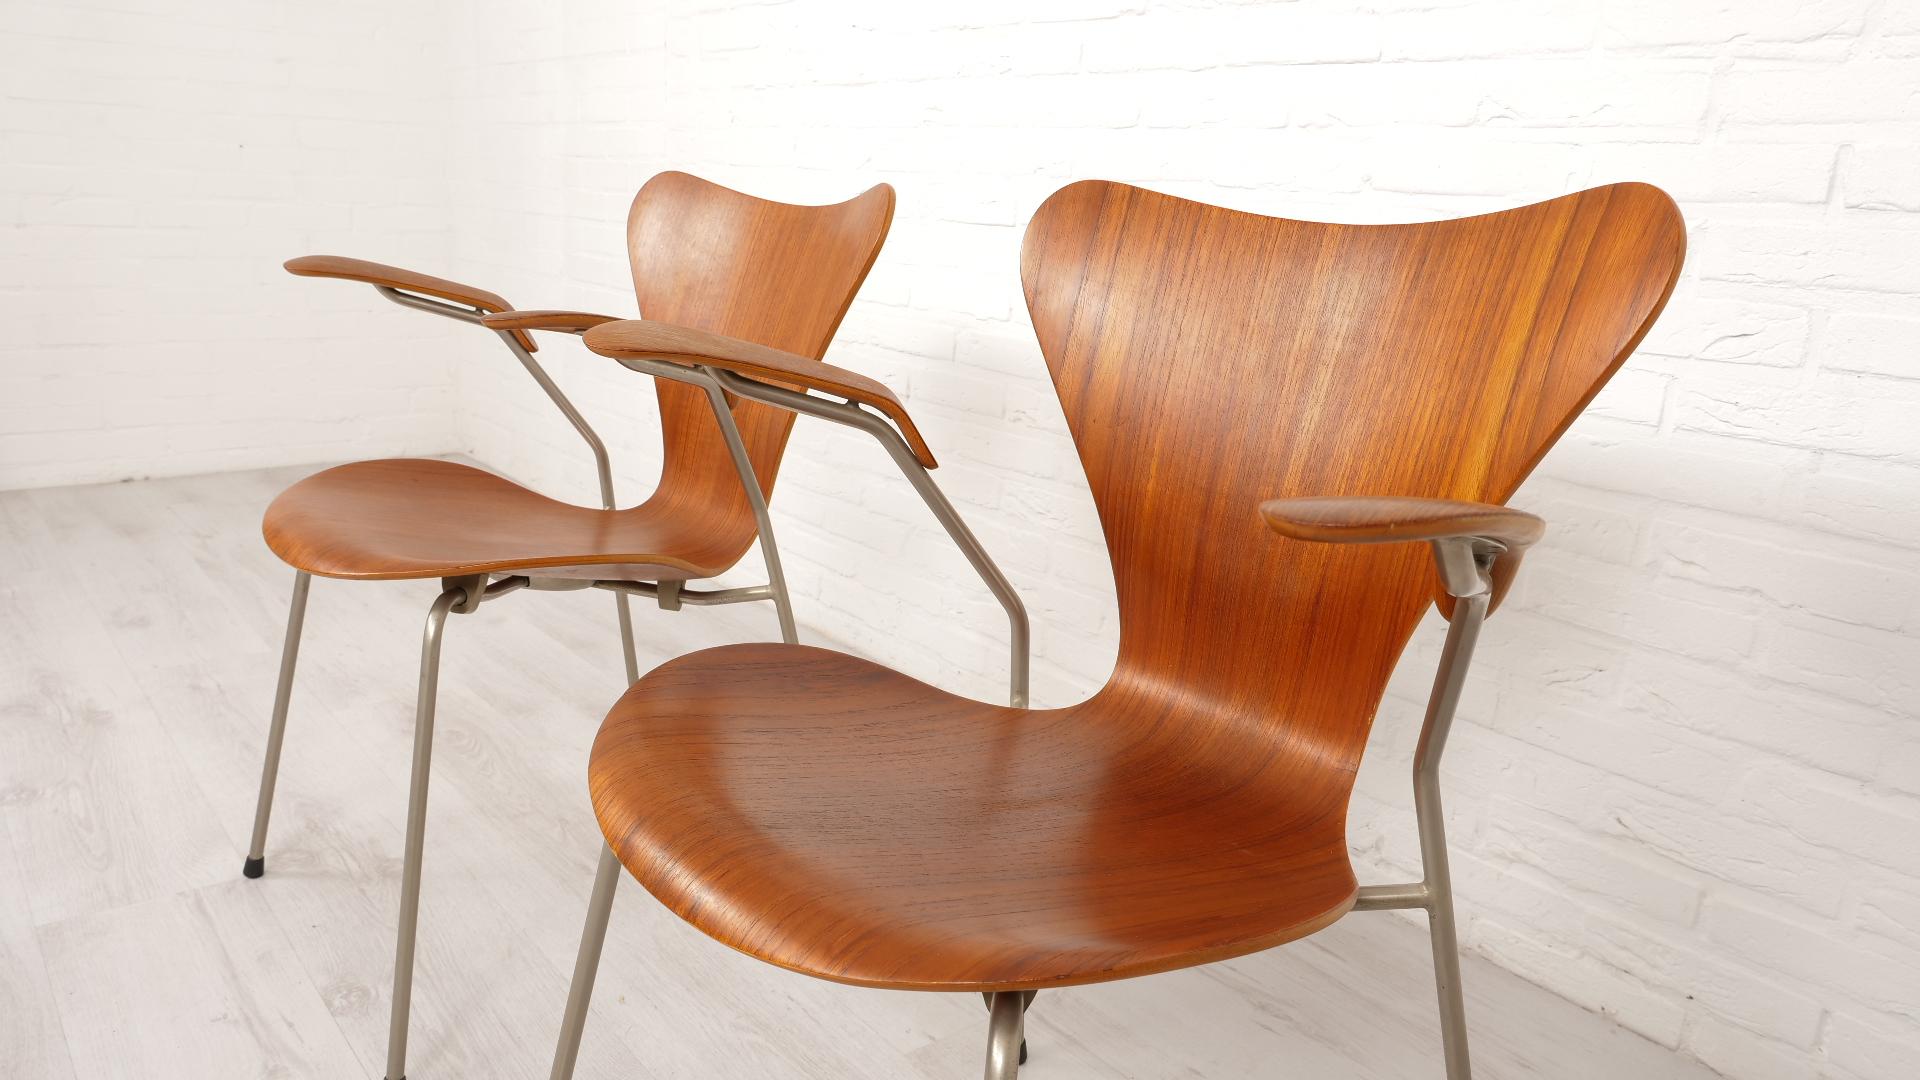 2 Vintage butterfly chairs with armrests by Arne Jacobsen model 3207 Teak For Sale 1